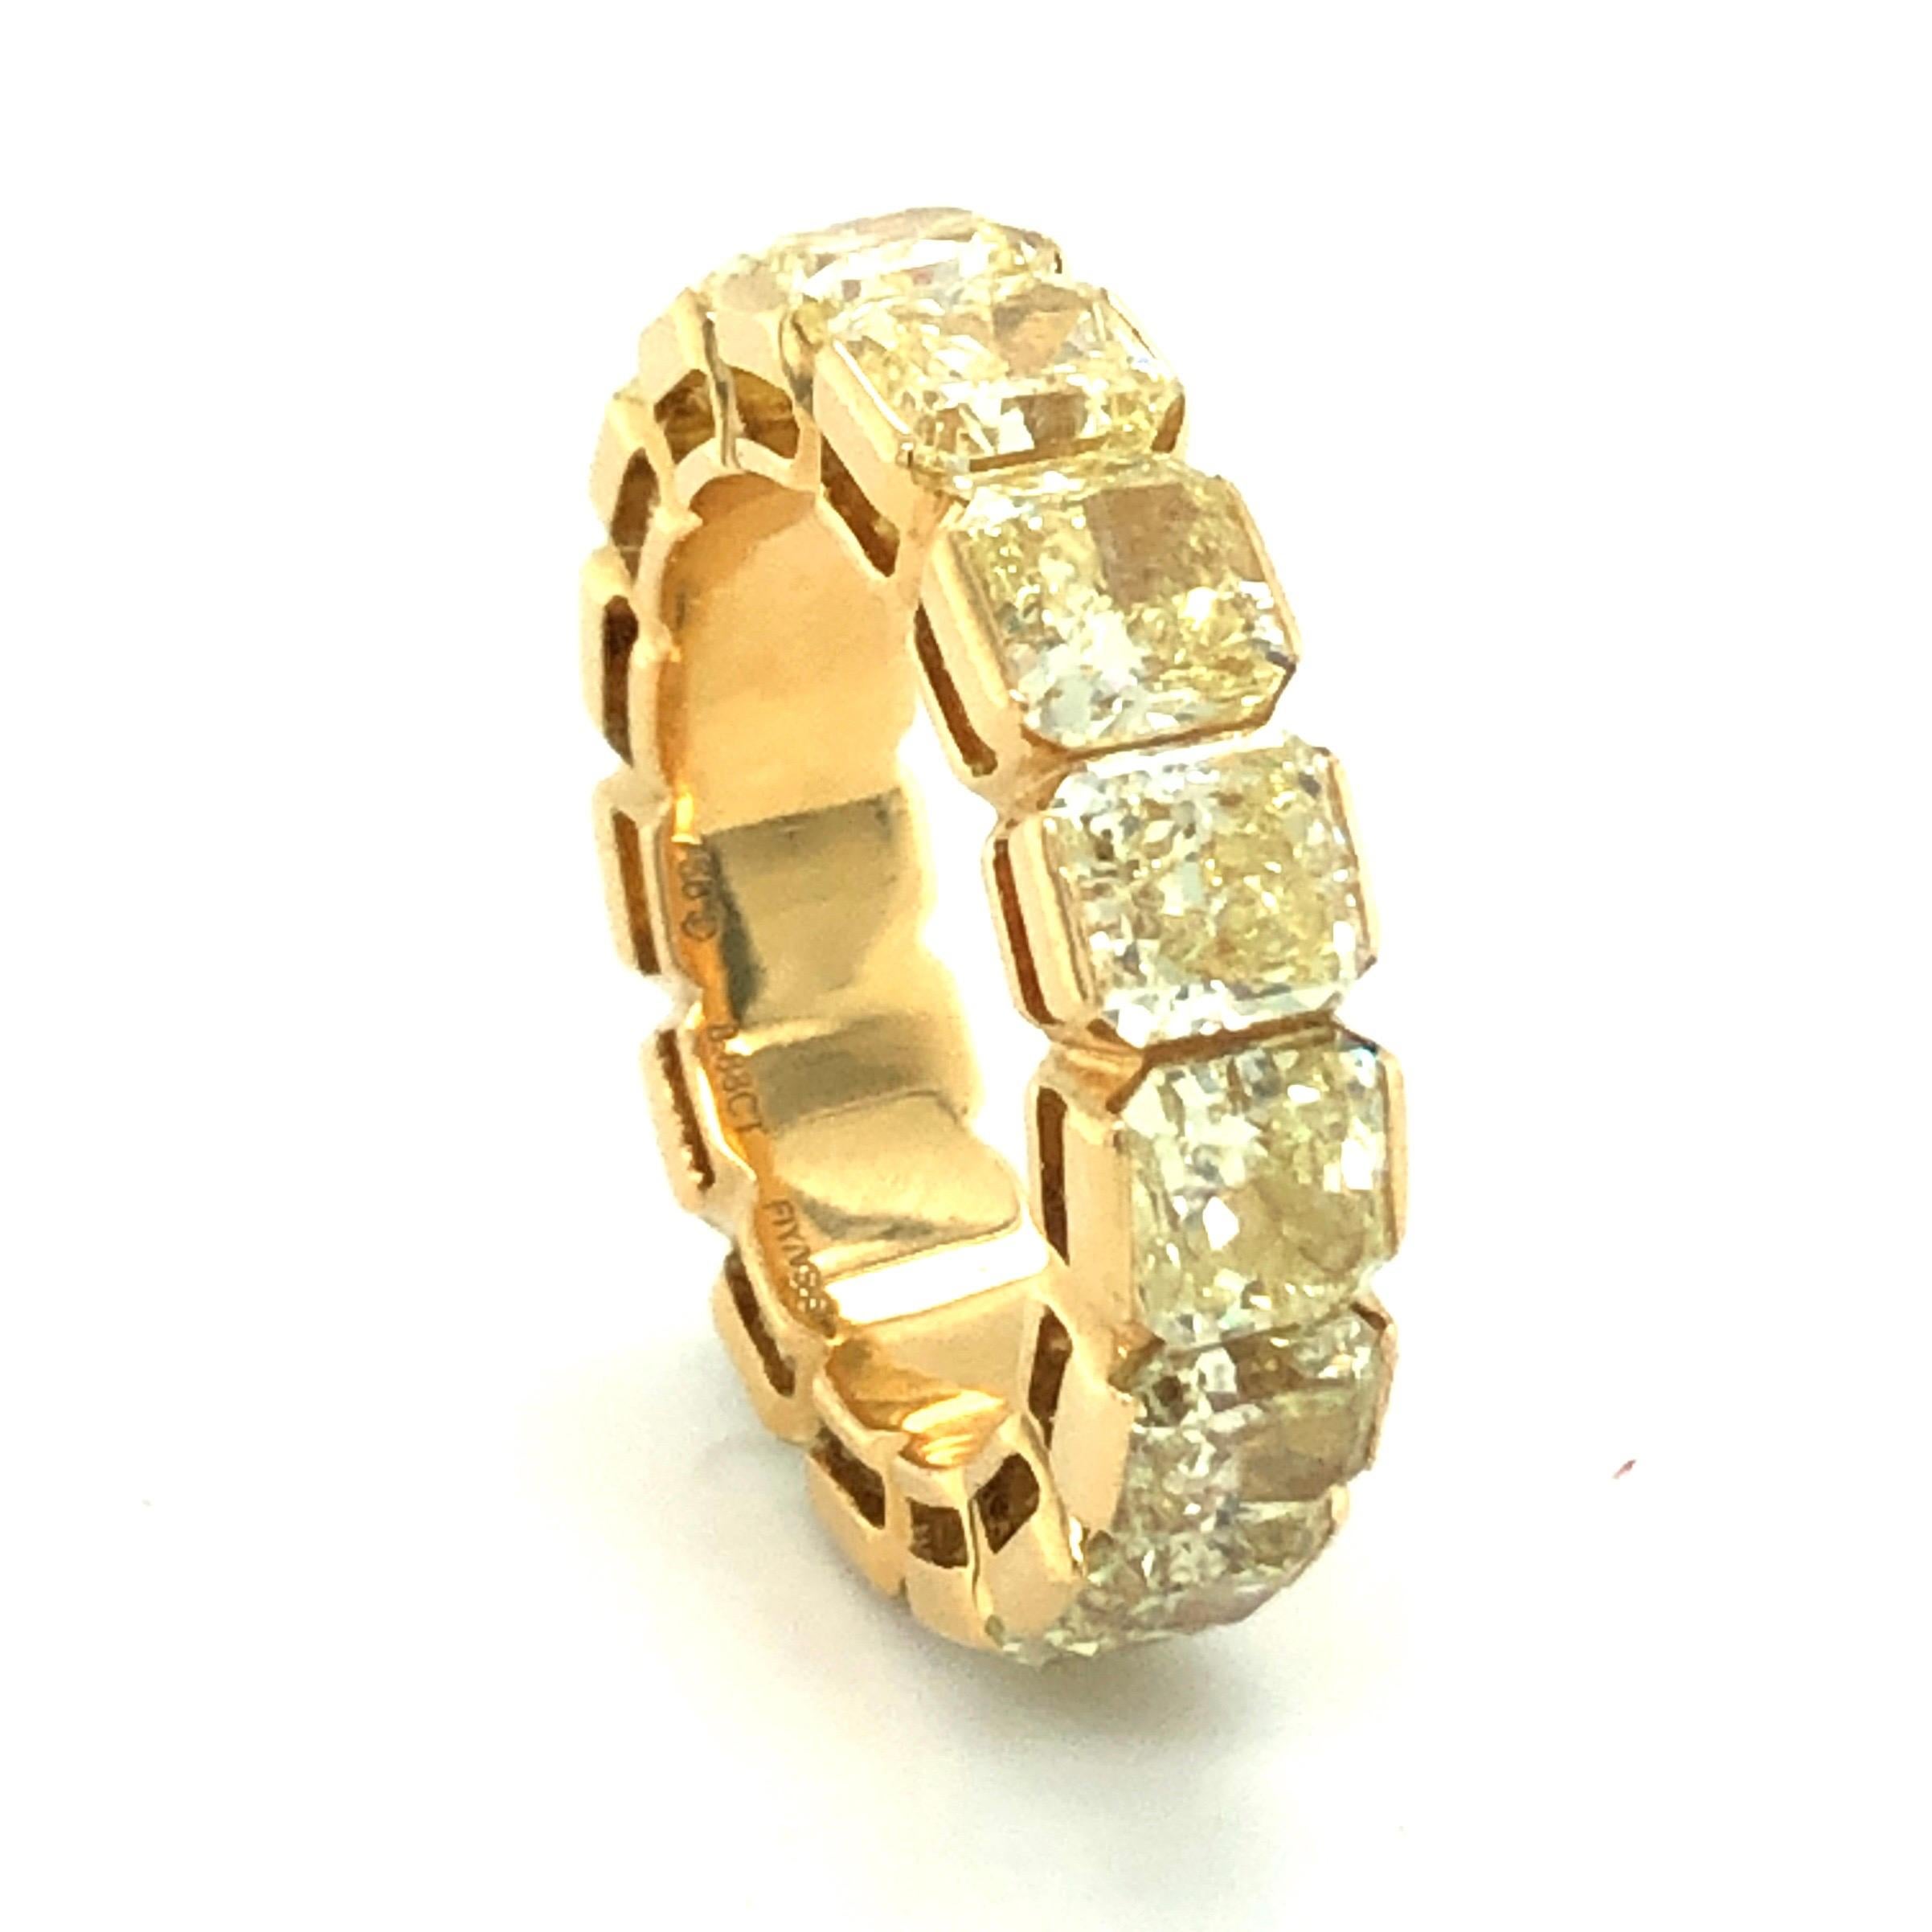 Absolutely stunning eternity band ring crafted in 18 karat yellow gold and set with 15 perfectly matched radiant-cut fancy intense yellow diamonds totalling 8.88 carats.

This jewel is in excellent condition.

Ring size is 52 (EU) / 6.5